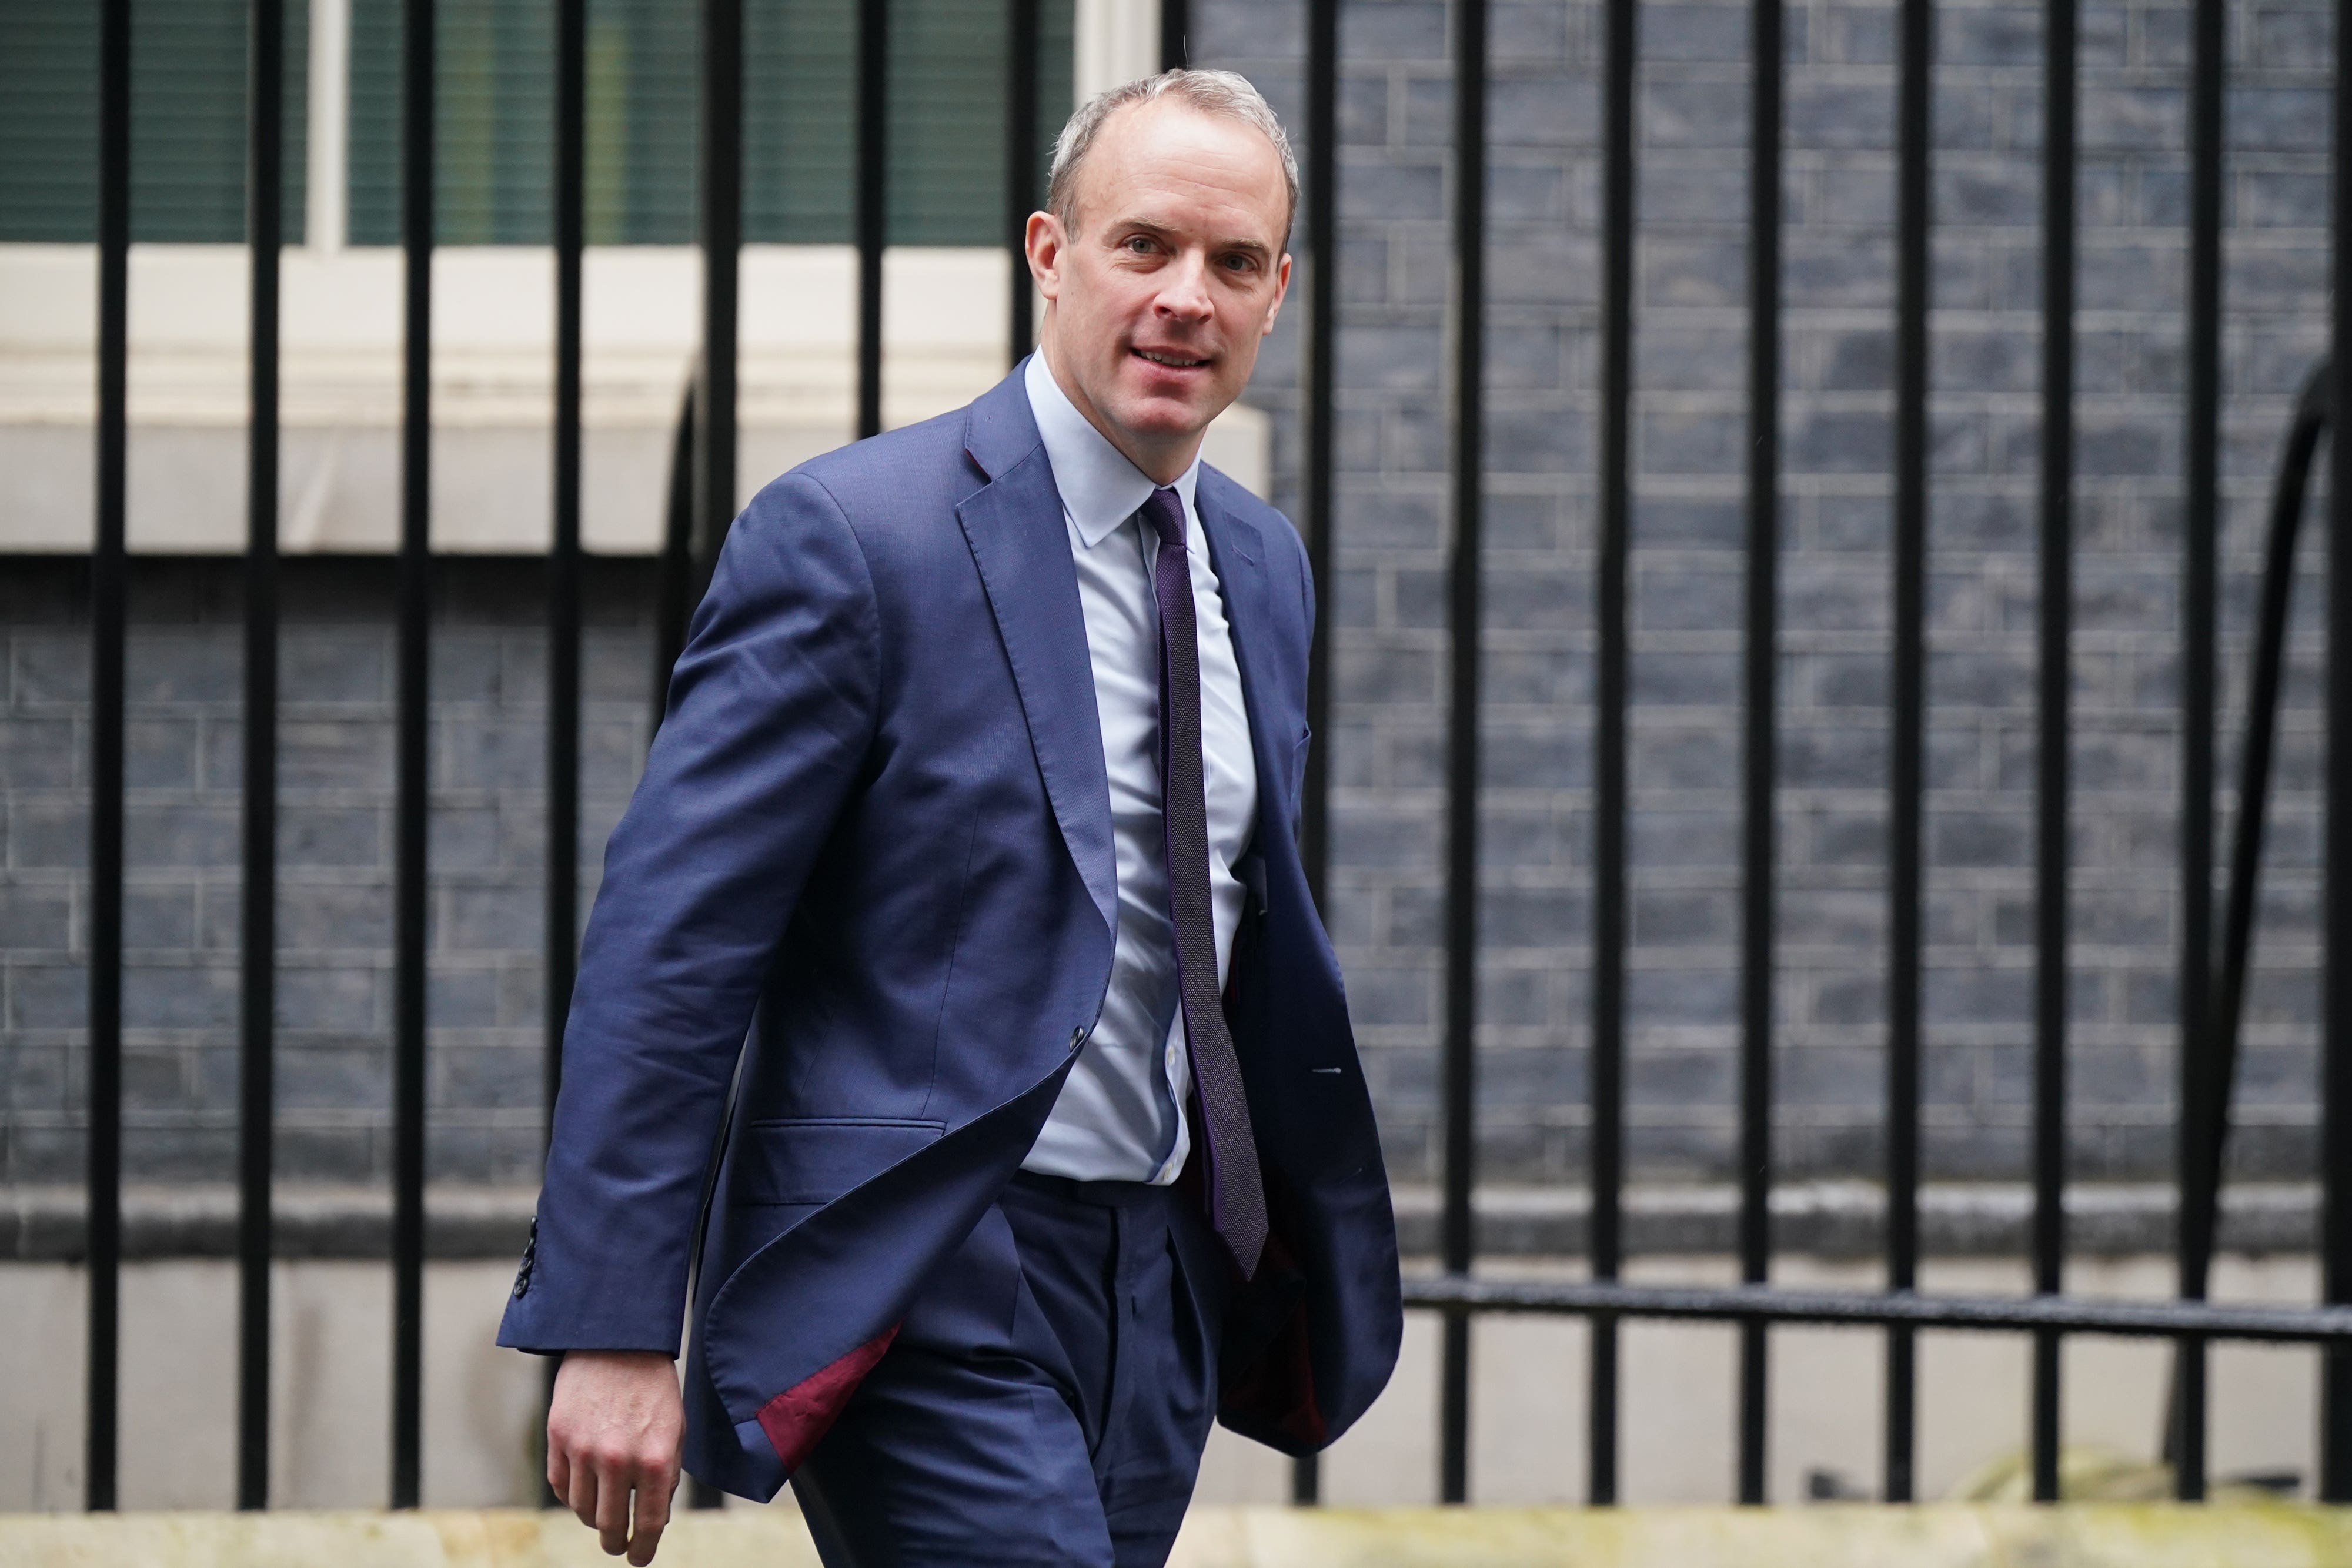 Rishi Sunak and Dominic Raab’s response to the report into bullying accusations against the former deputy prime minister has made future civil service complaints more difficult, according to a think tank chief (Yui Mok/PA)